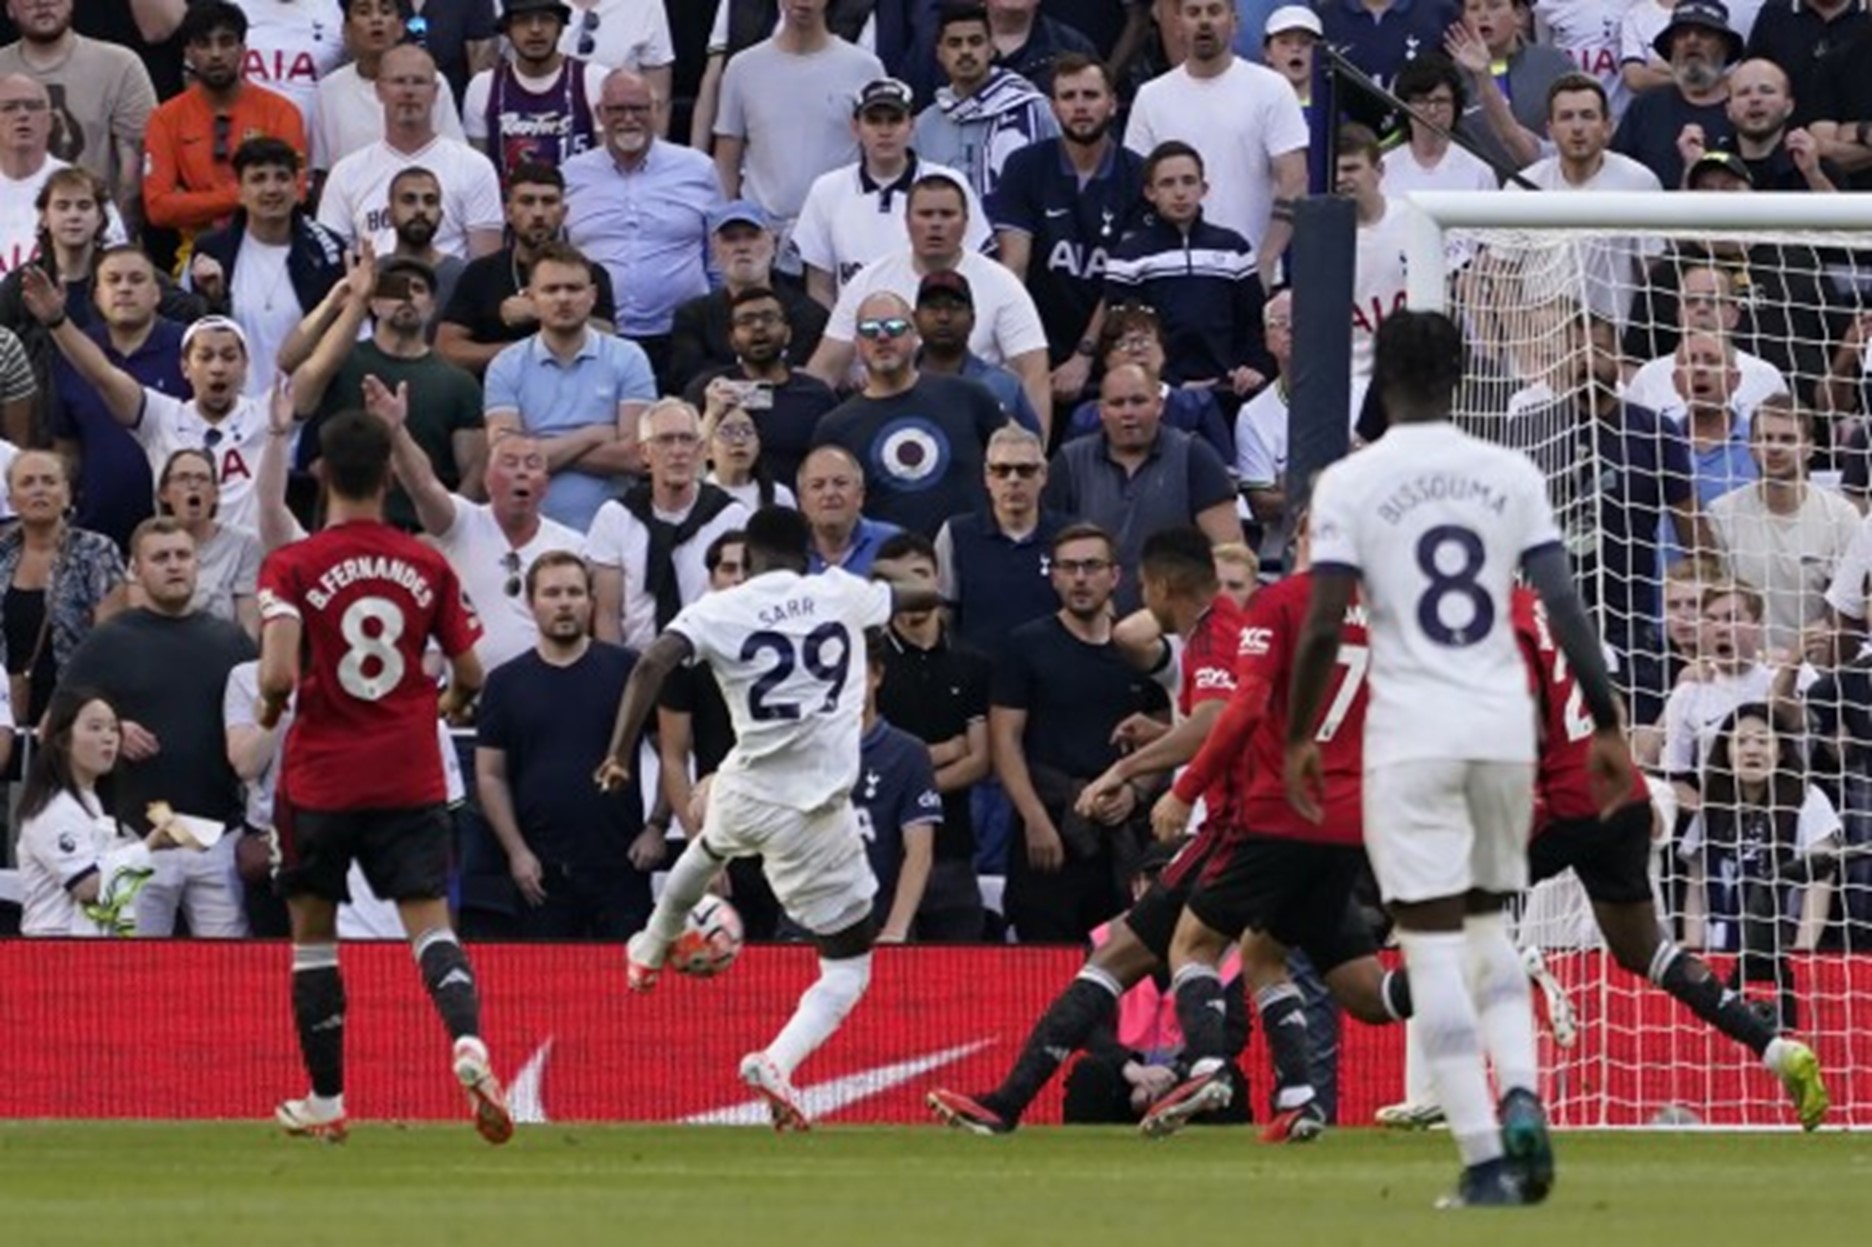 Tottenham beats Man United 2-0 in EPL to give manager Ange Postecoglou a winning home debut